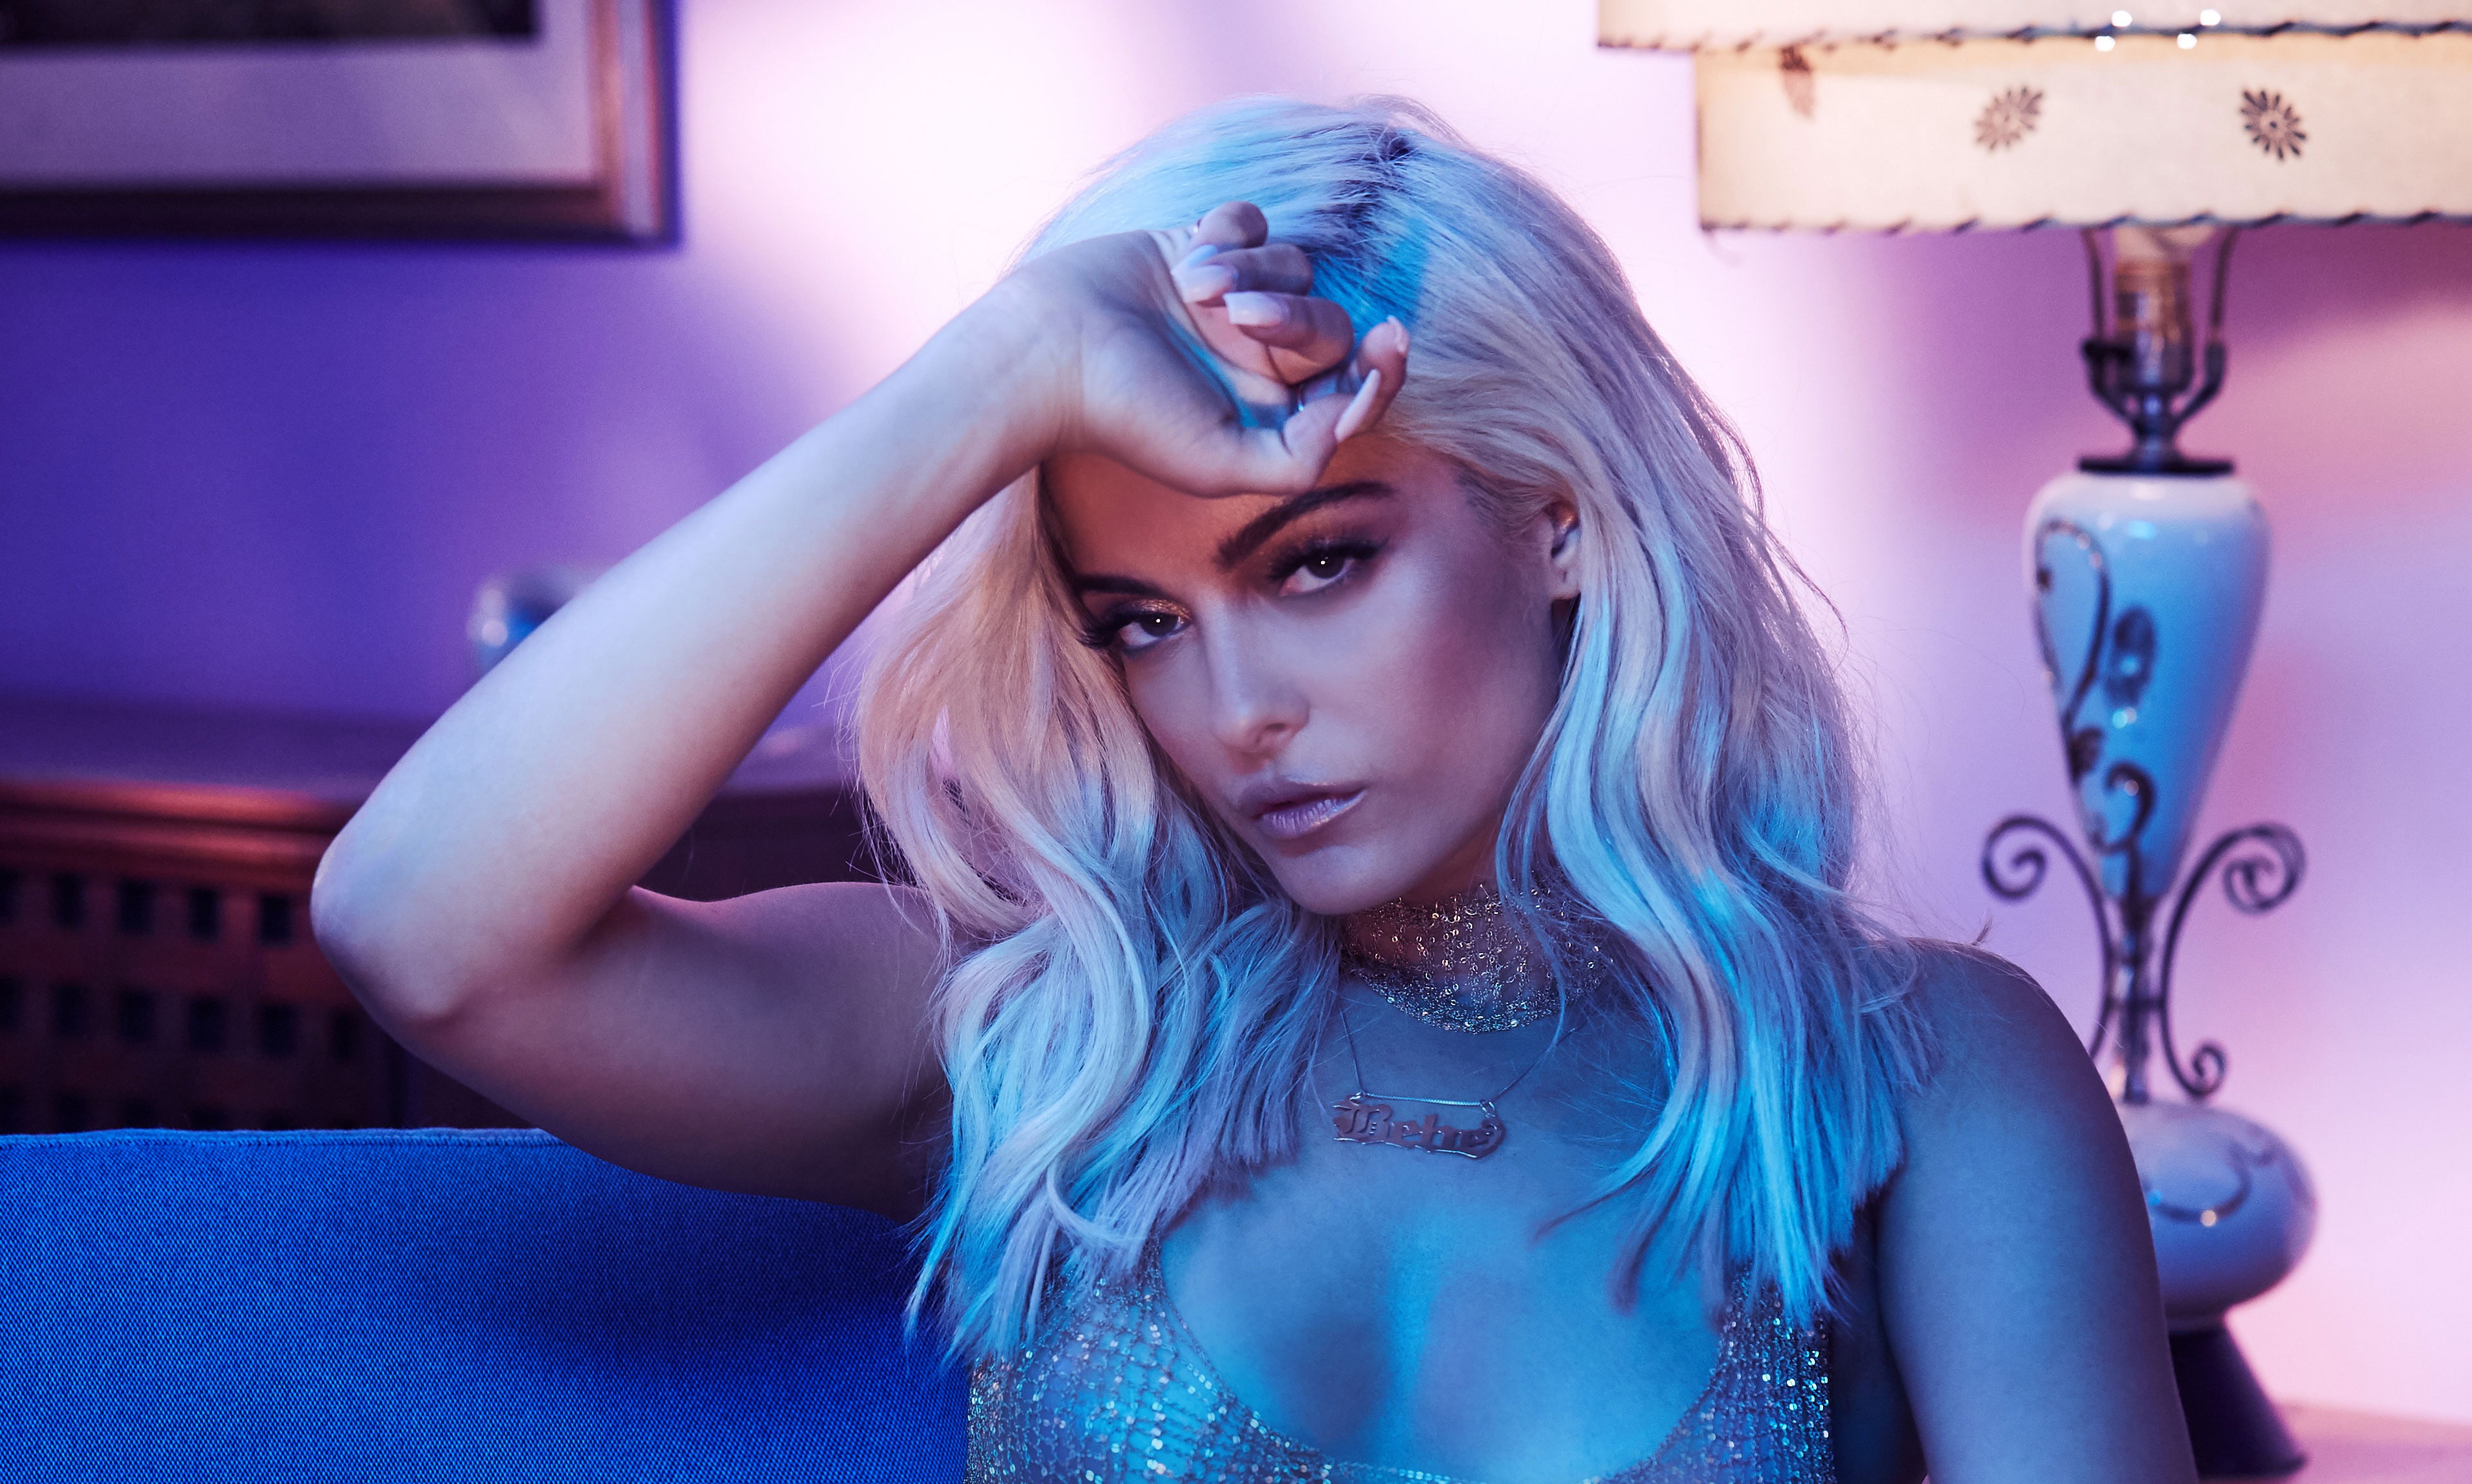 bebe rexha, singer, music, girls, hd, 4k, hair, hairstyle, young adult